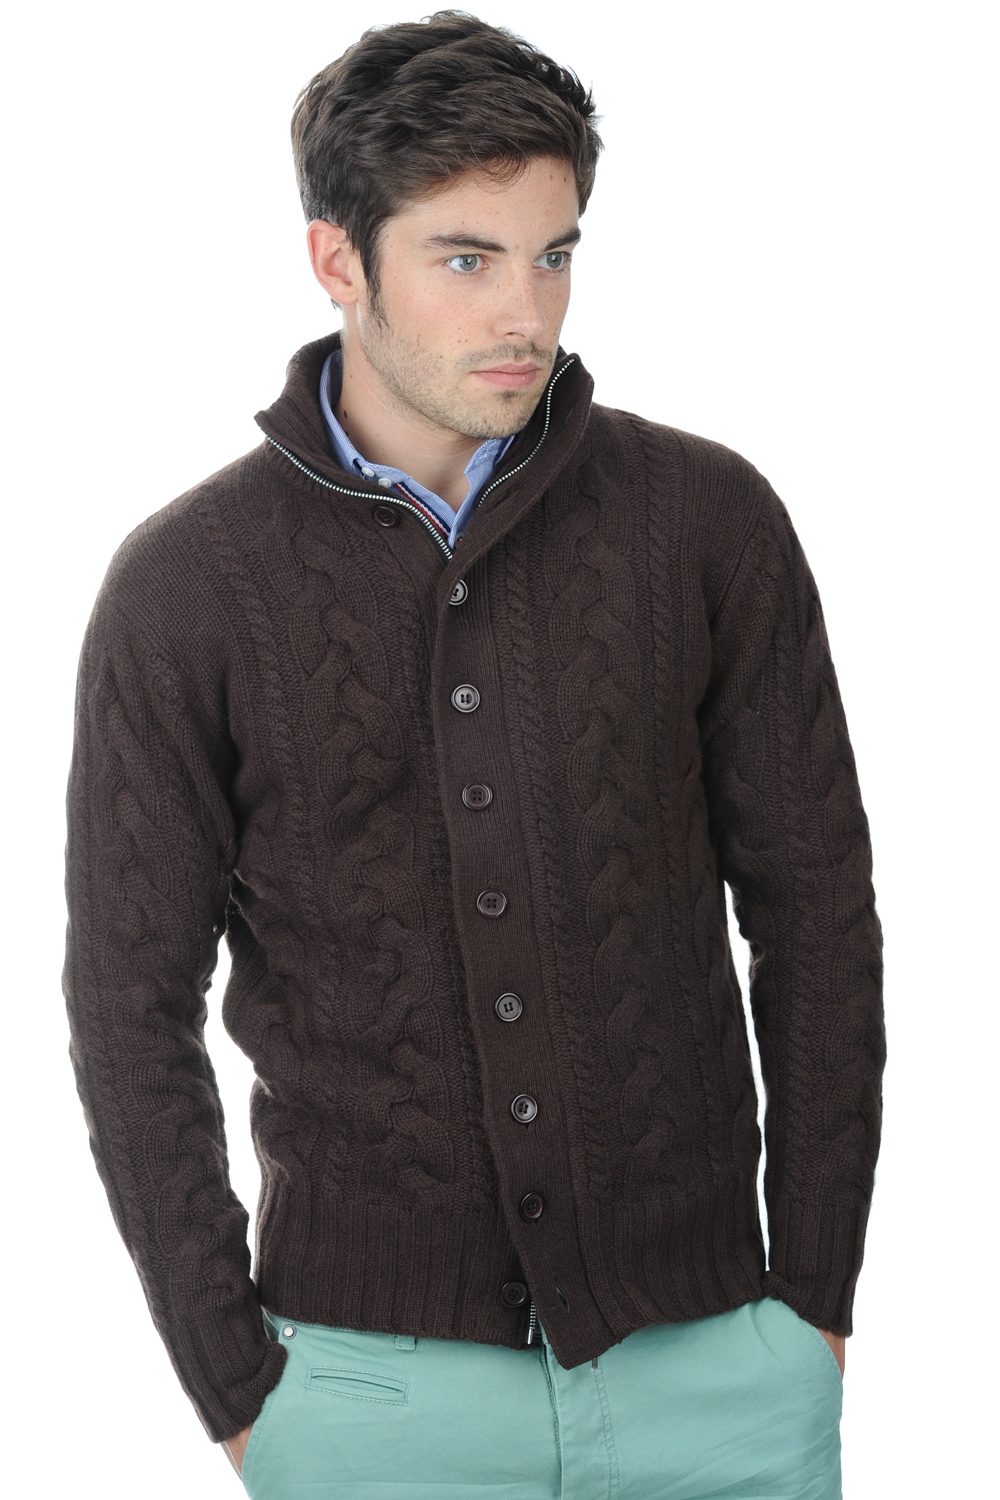 Cachemire pull homme loris capuccino s